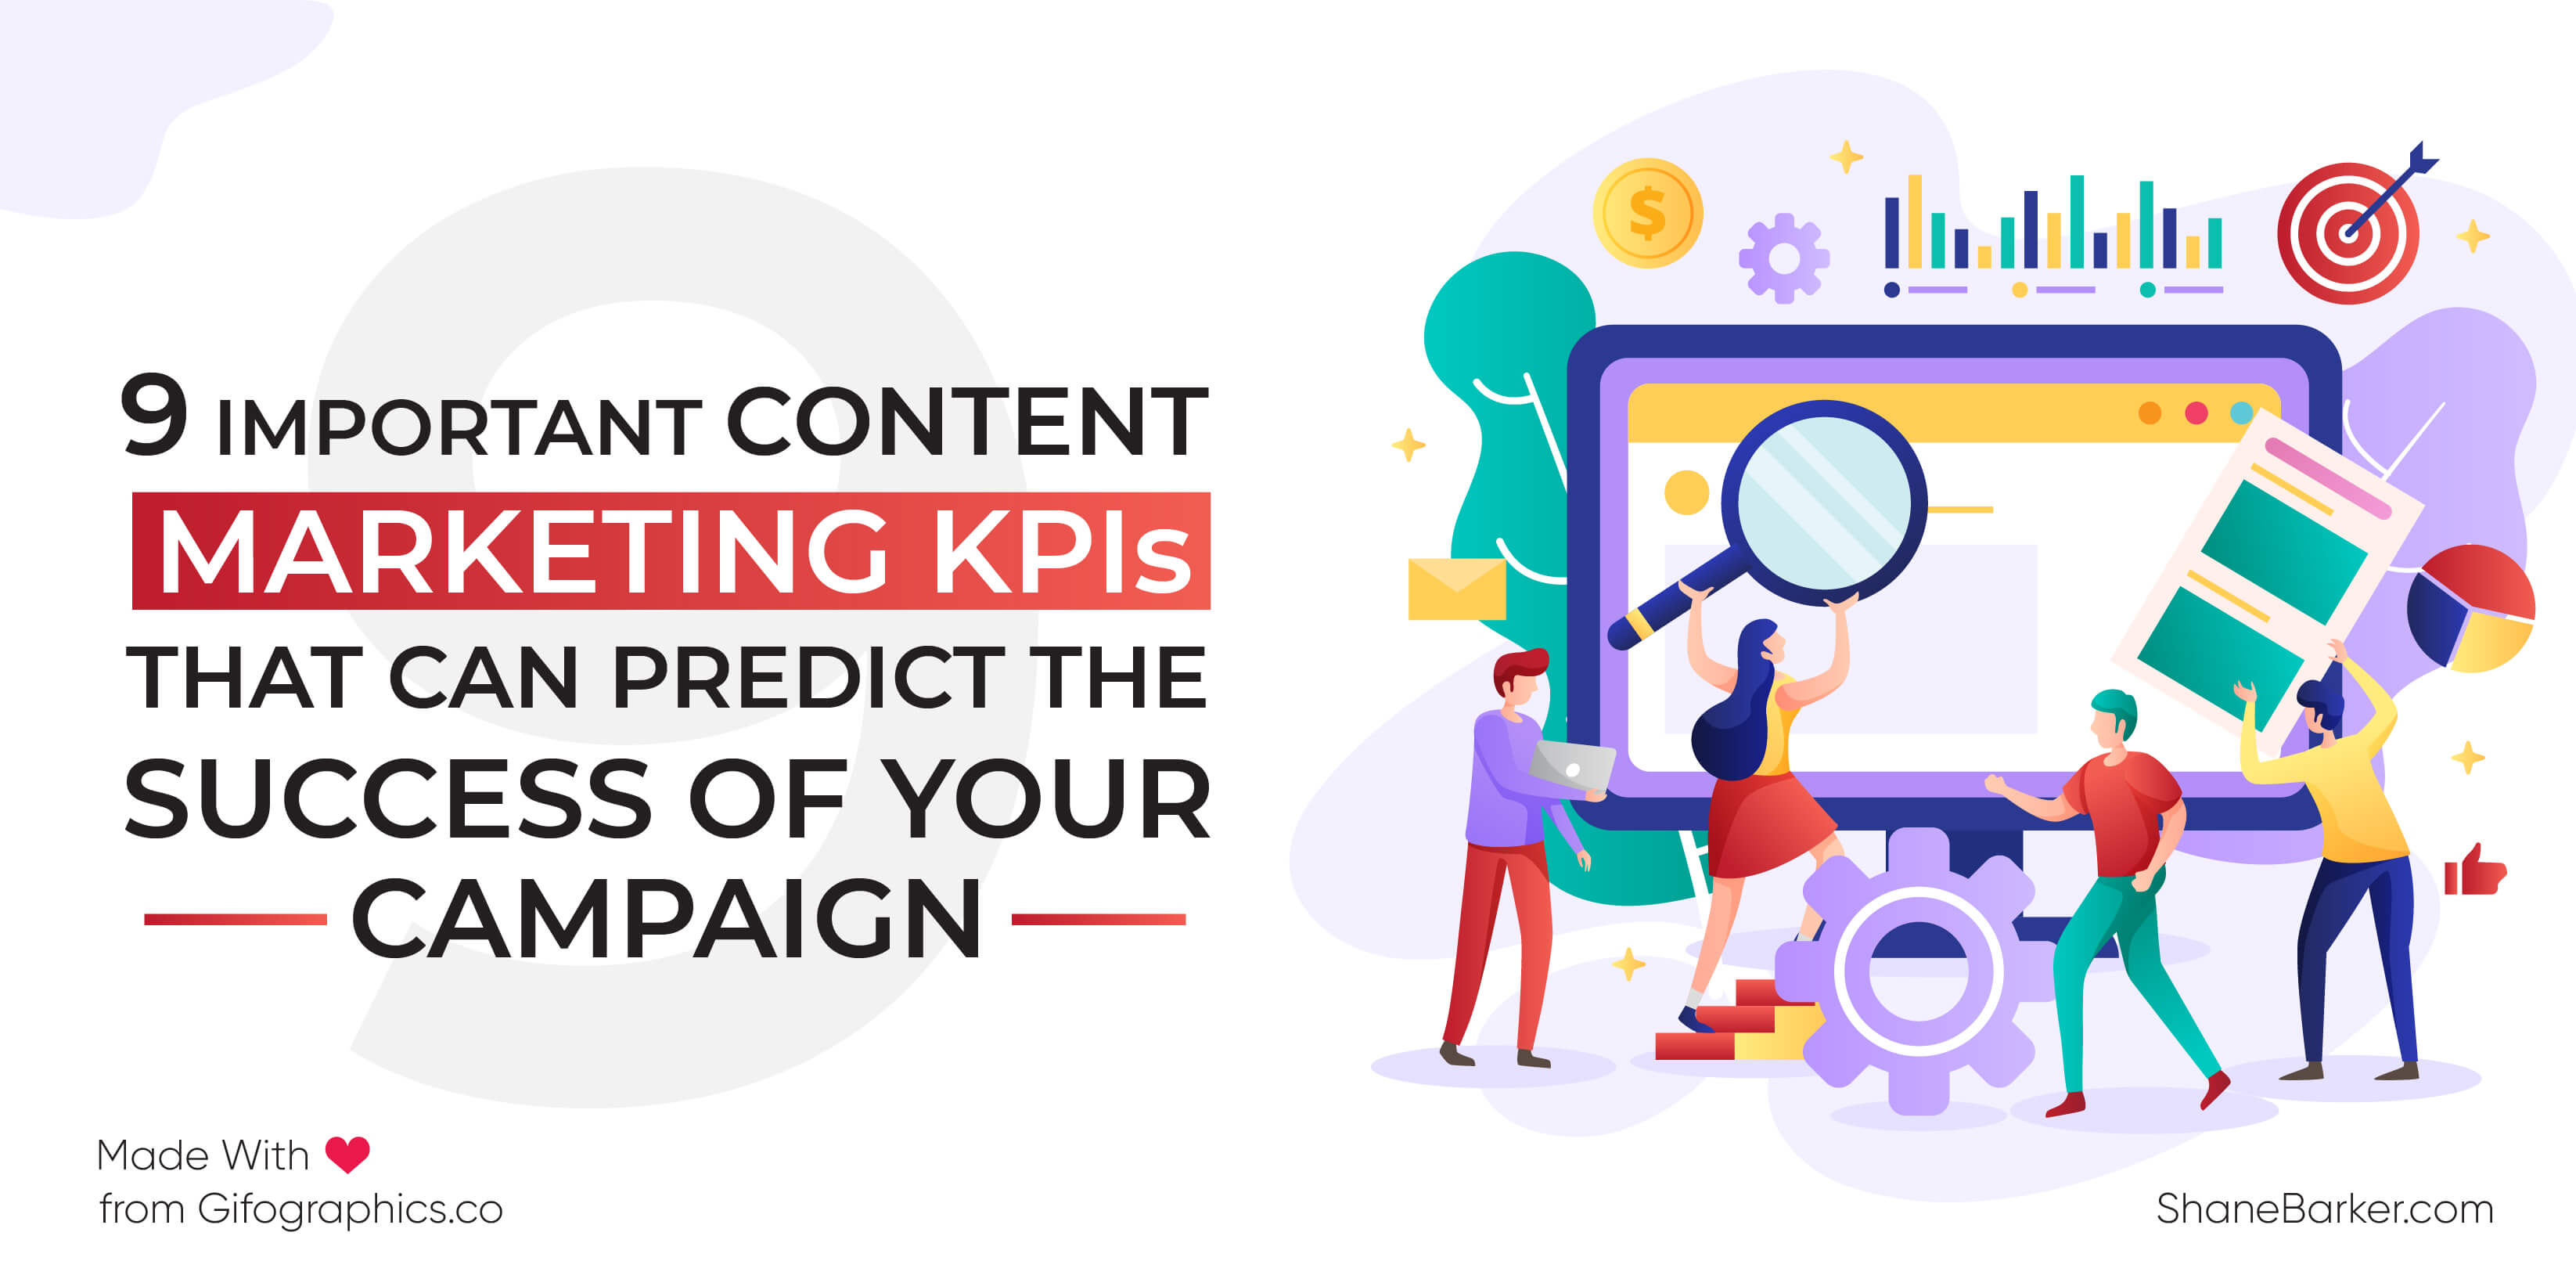 9 Important Content Marketing KPIs That Can Predict the Success of Your Campaign